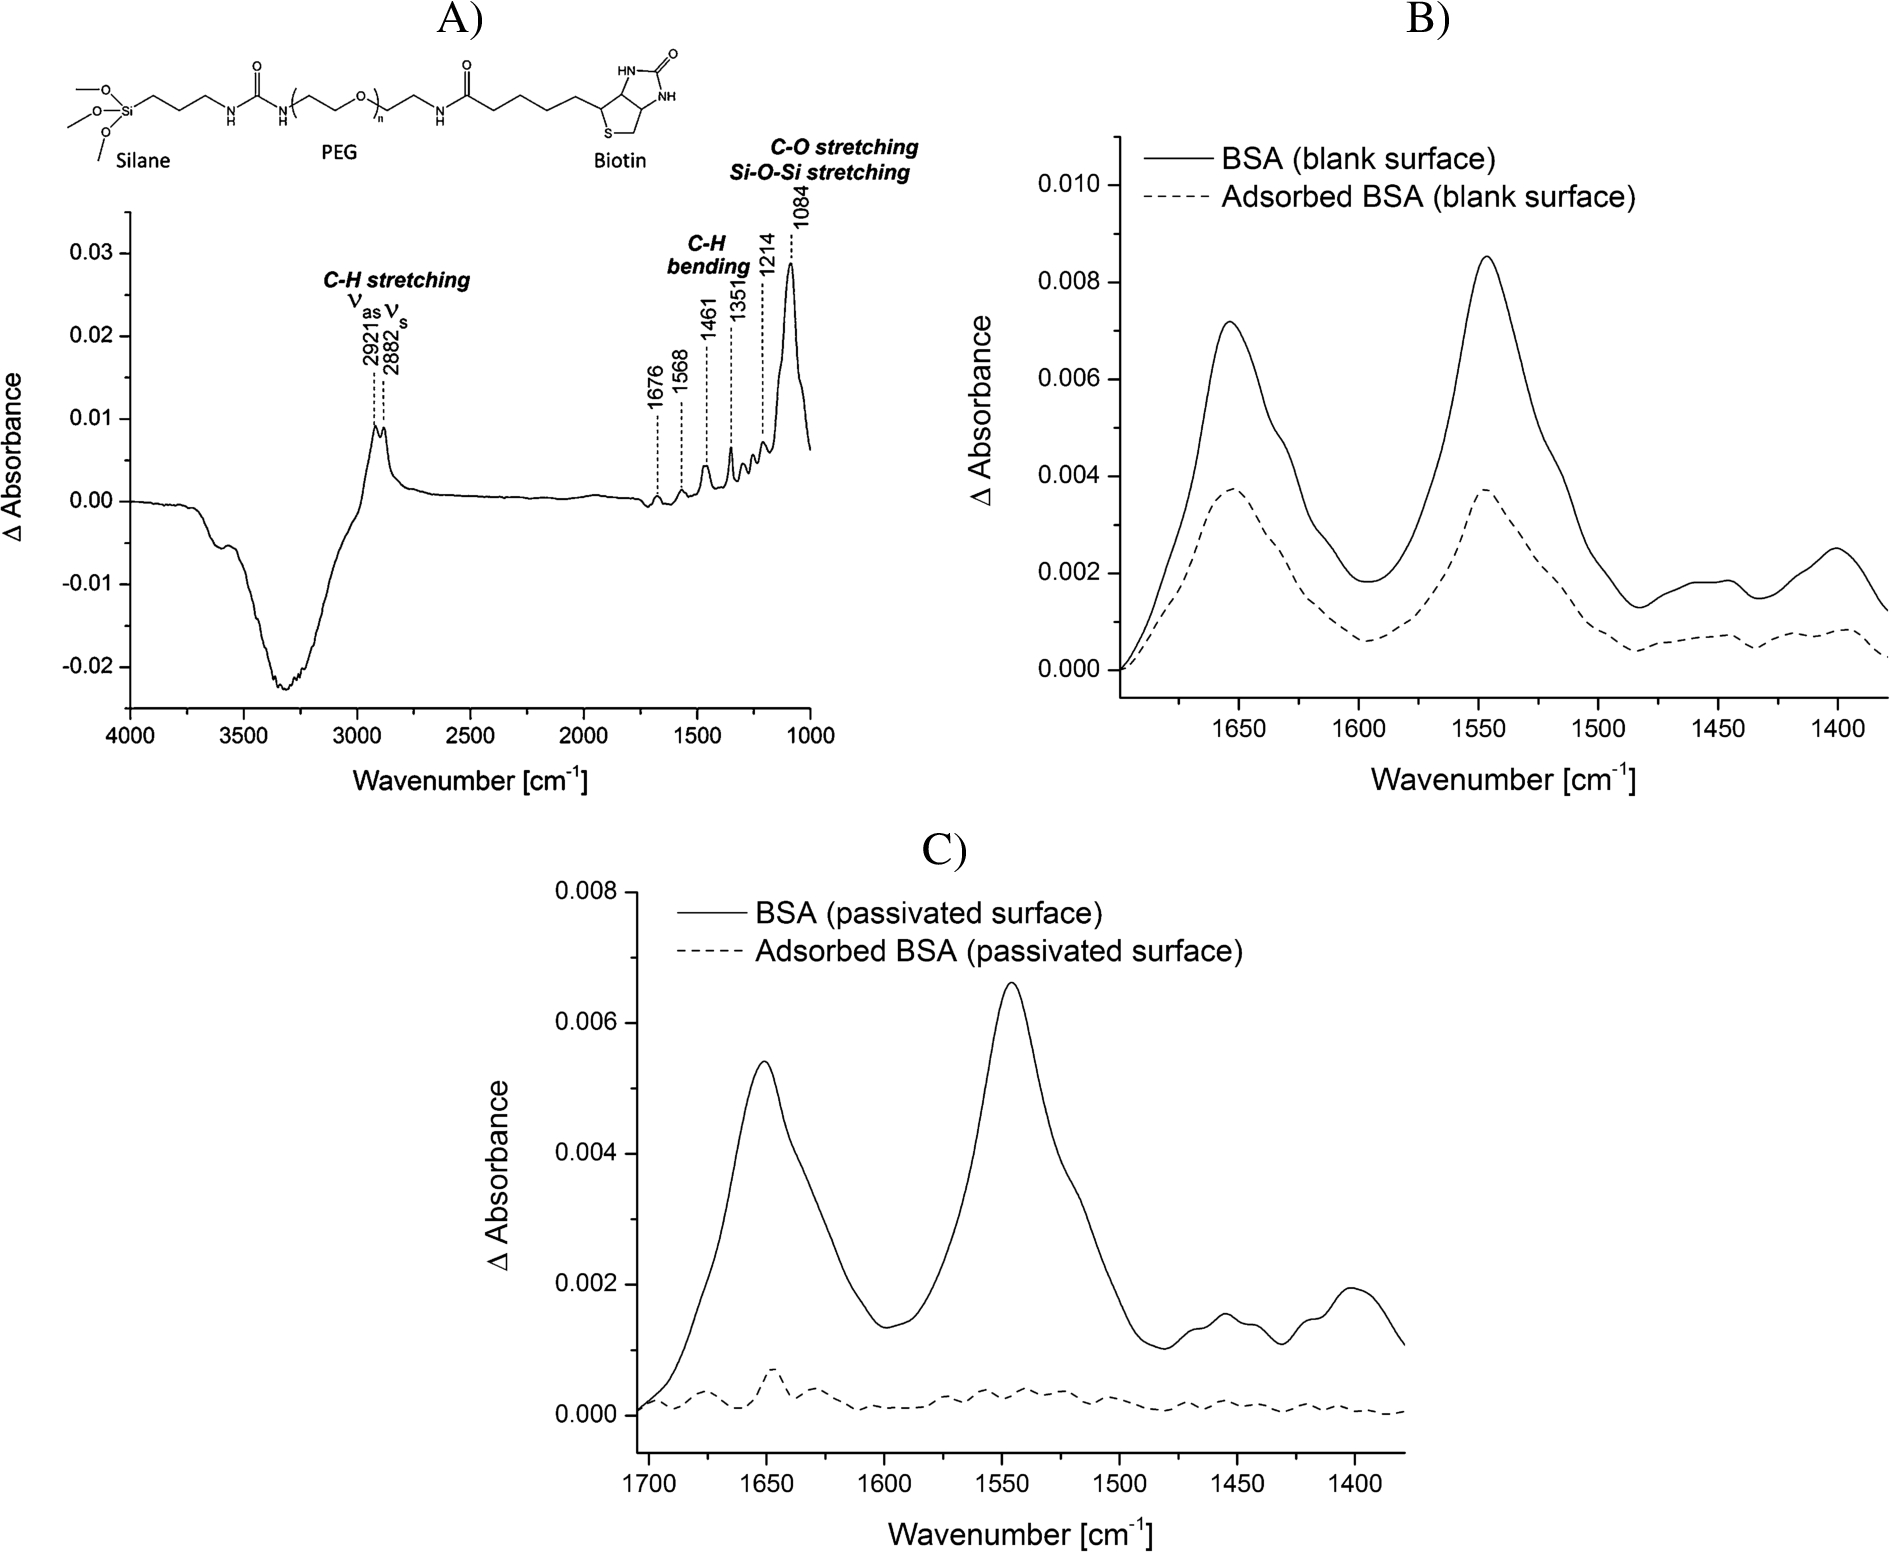 Analysis of the adsorption of BSA to the blank vs. the PEG-silane passivated ATR crystal surface. A) Structural formula of the biotin-PEG-silane linker and a representative spectrum of the biotin-PEG-silane modified surface in water. The reference spectrum is water. Typical vibrational modes are highlighted. B) BSA (5 mg/ml) was incubated for 20 min on the blank surface. Spectra were recorded before (continuous line) and after (dotted line) washing the surface several times with water. The reference spectrum is water. C) BSA (5 mg/ml) was incubated for 20 min on the PEG-silane modified surface. Spectra were recorded before (continuous line) and after (dotted line) washing the surface several times with water. The reference spectrum is the PEG-modified surface in water.